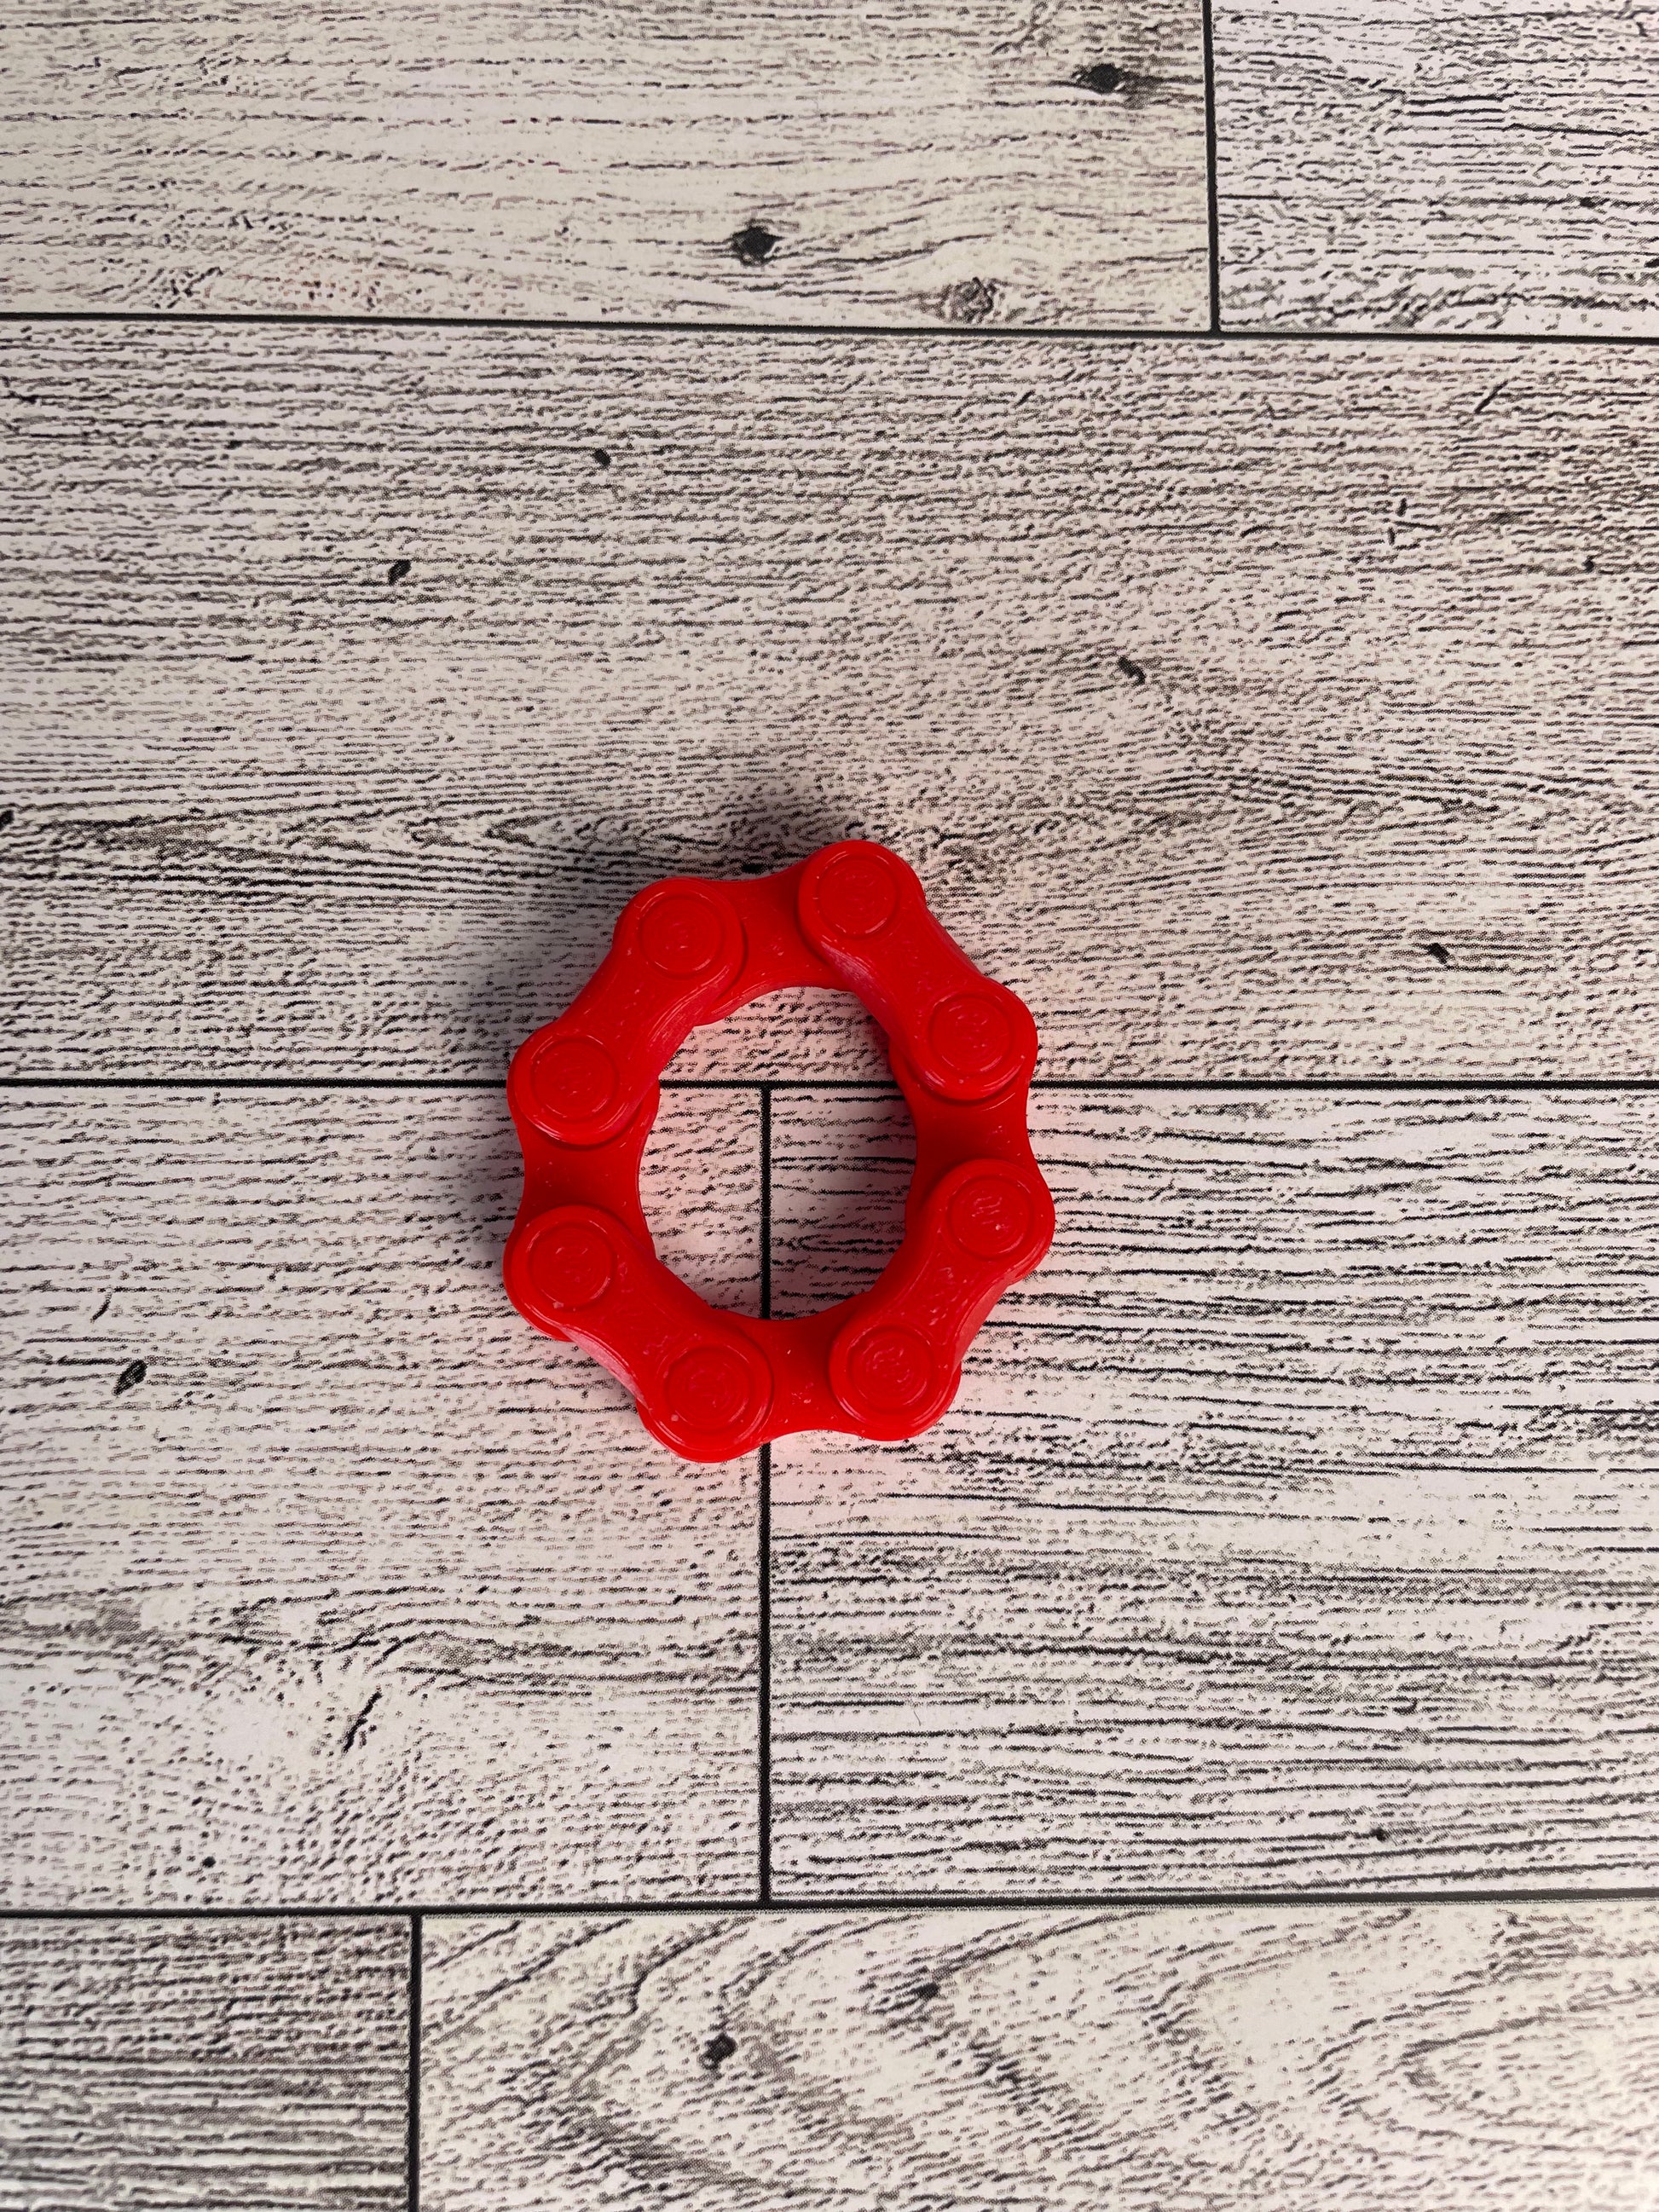 A red chain link on a wood backdrop. The chain is arranged in a circle shape and there are four links.